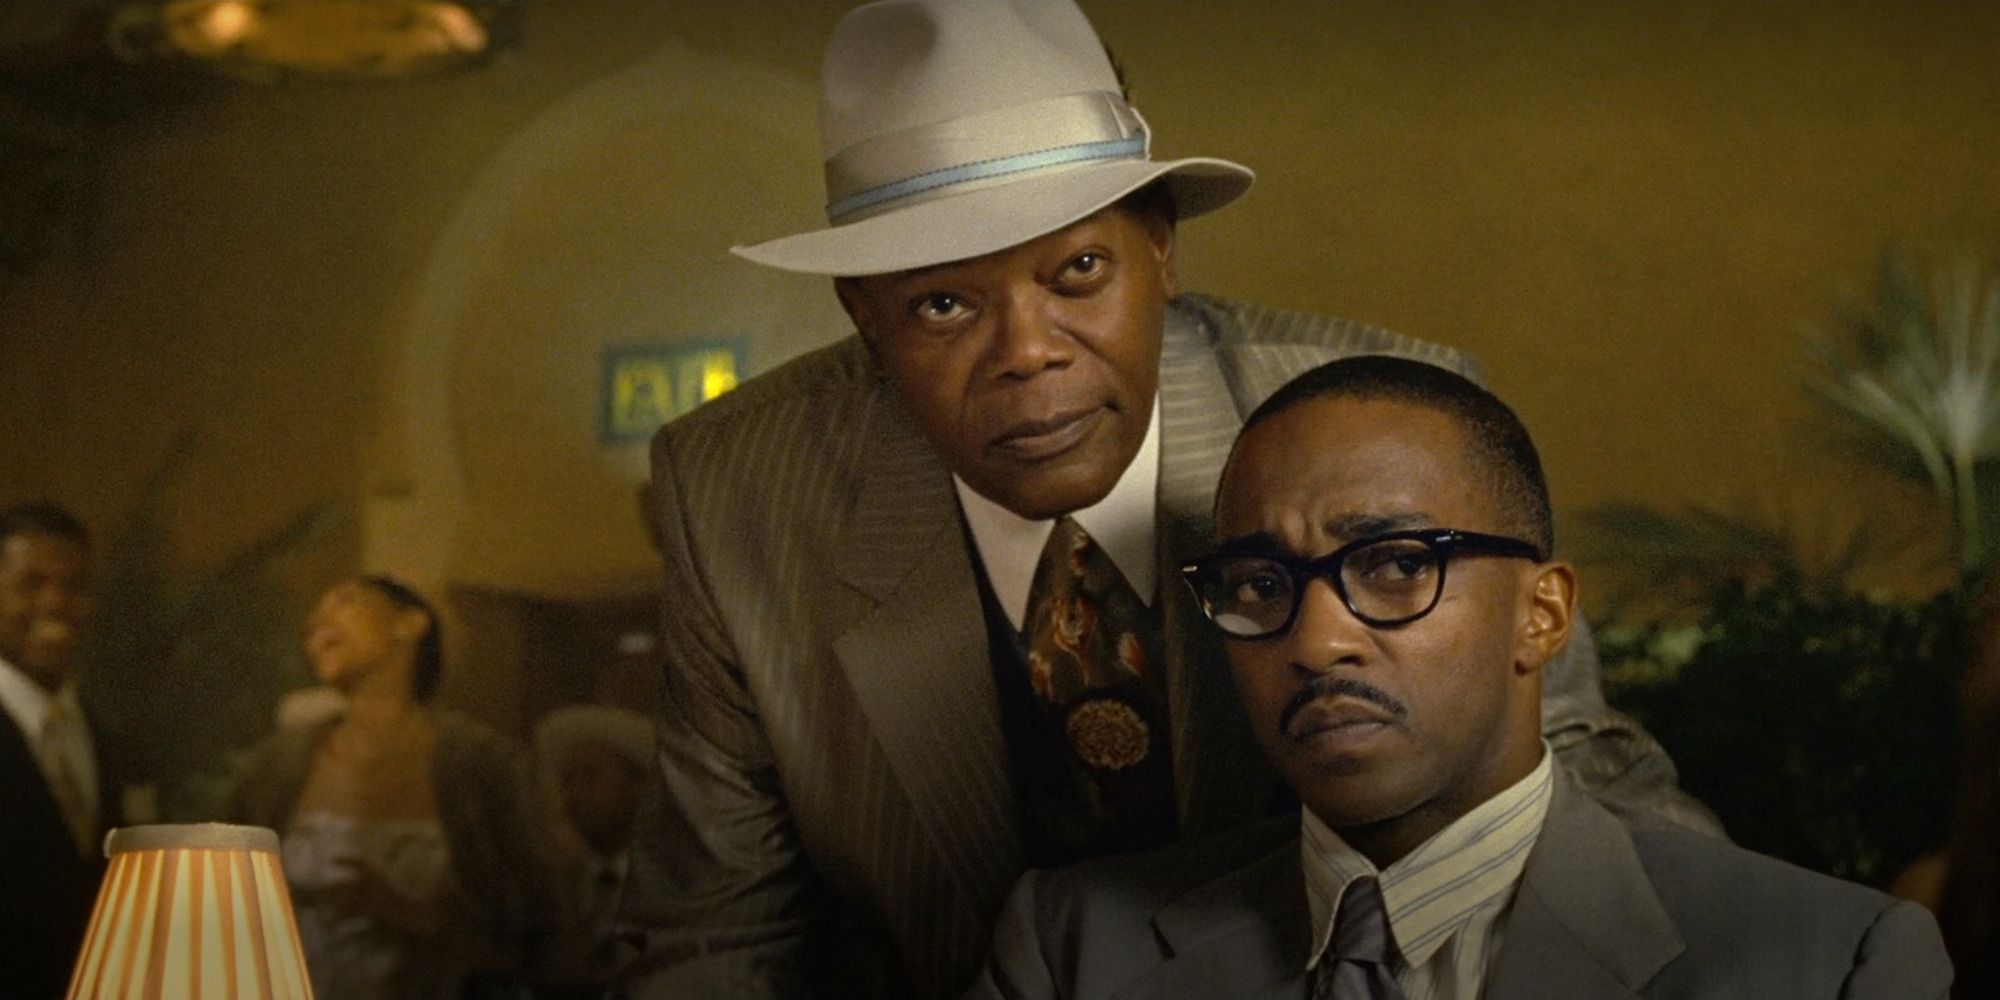 Samuel L. Jackson and Anthony Mackie in 'The Banker', sitting at a cafe with period clothes